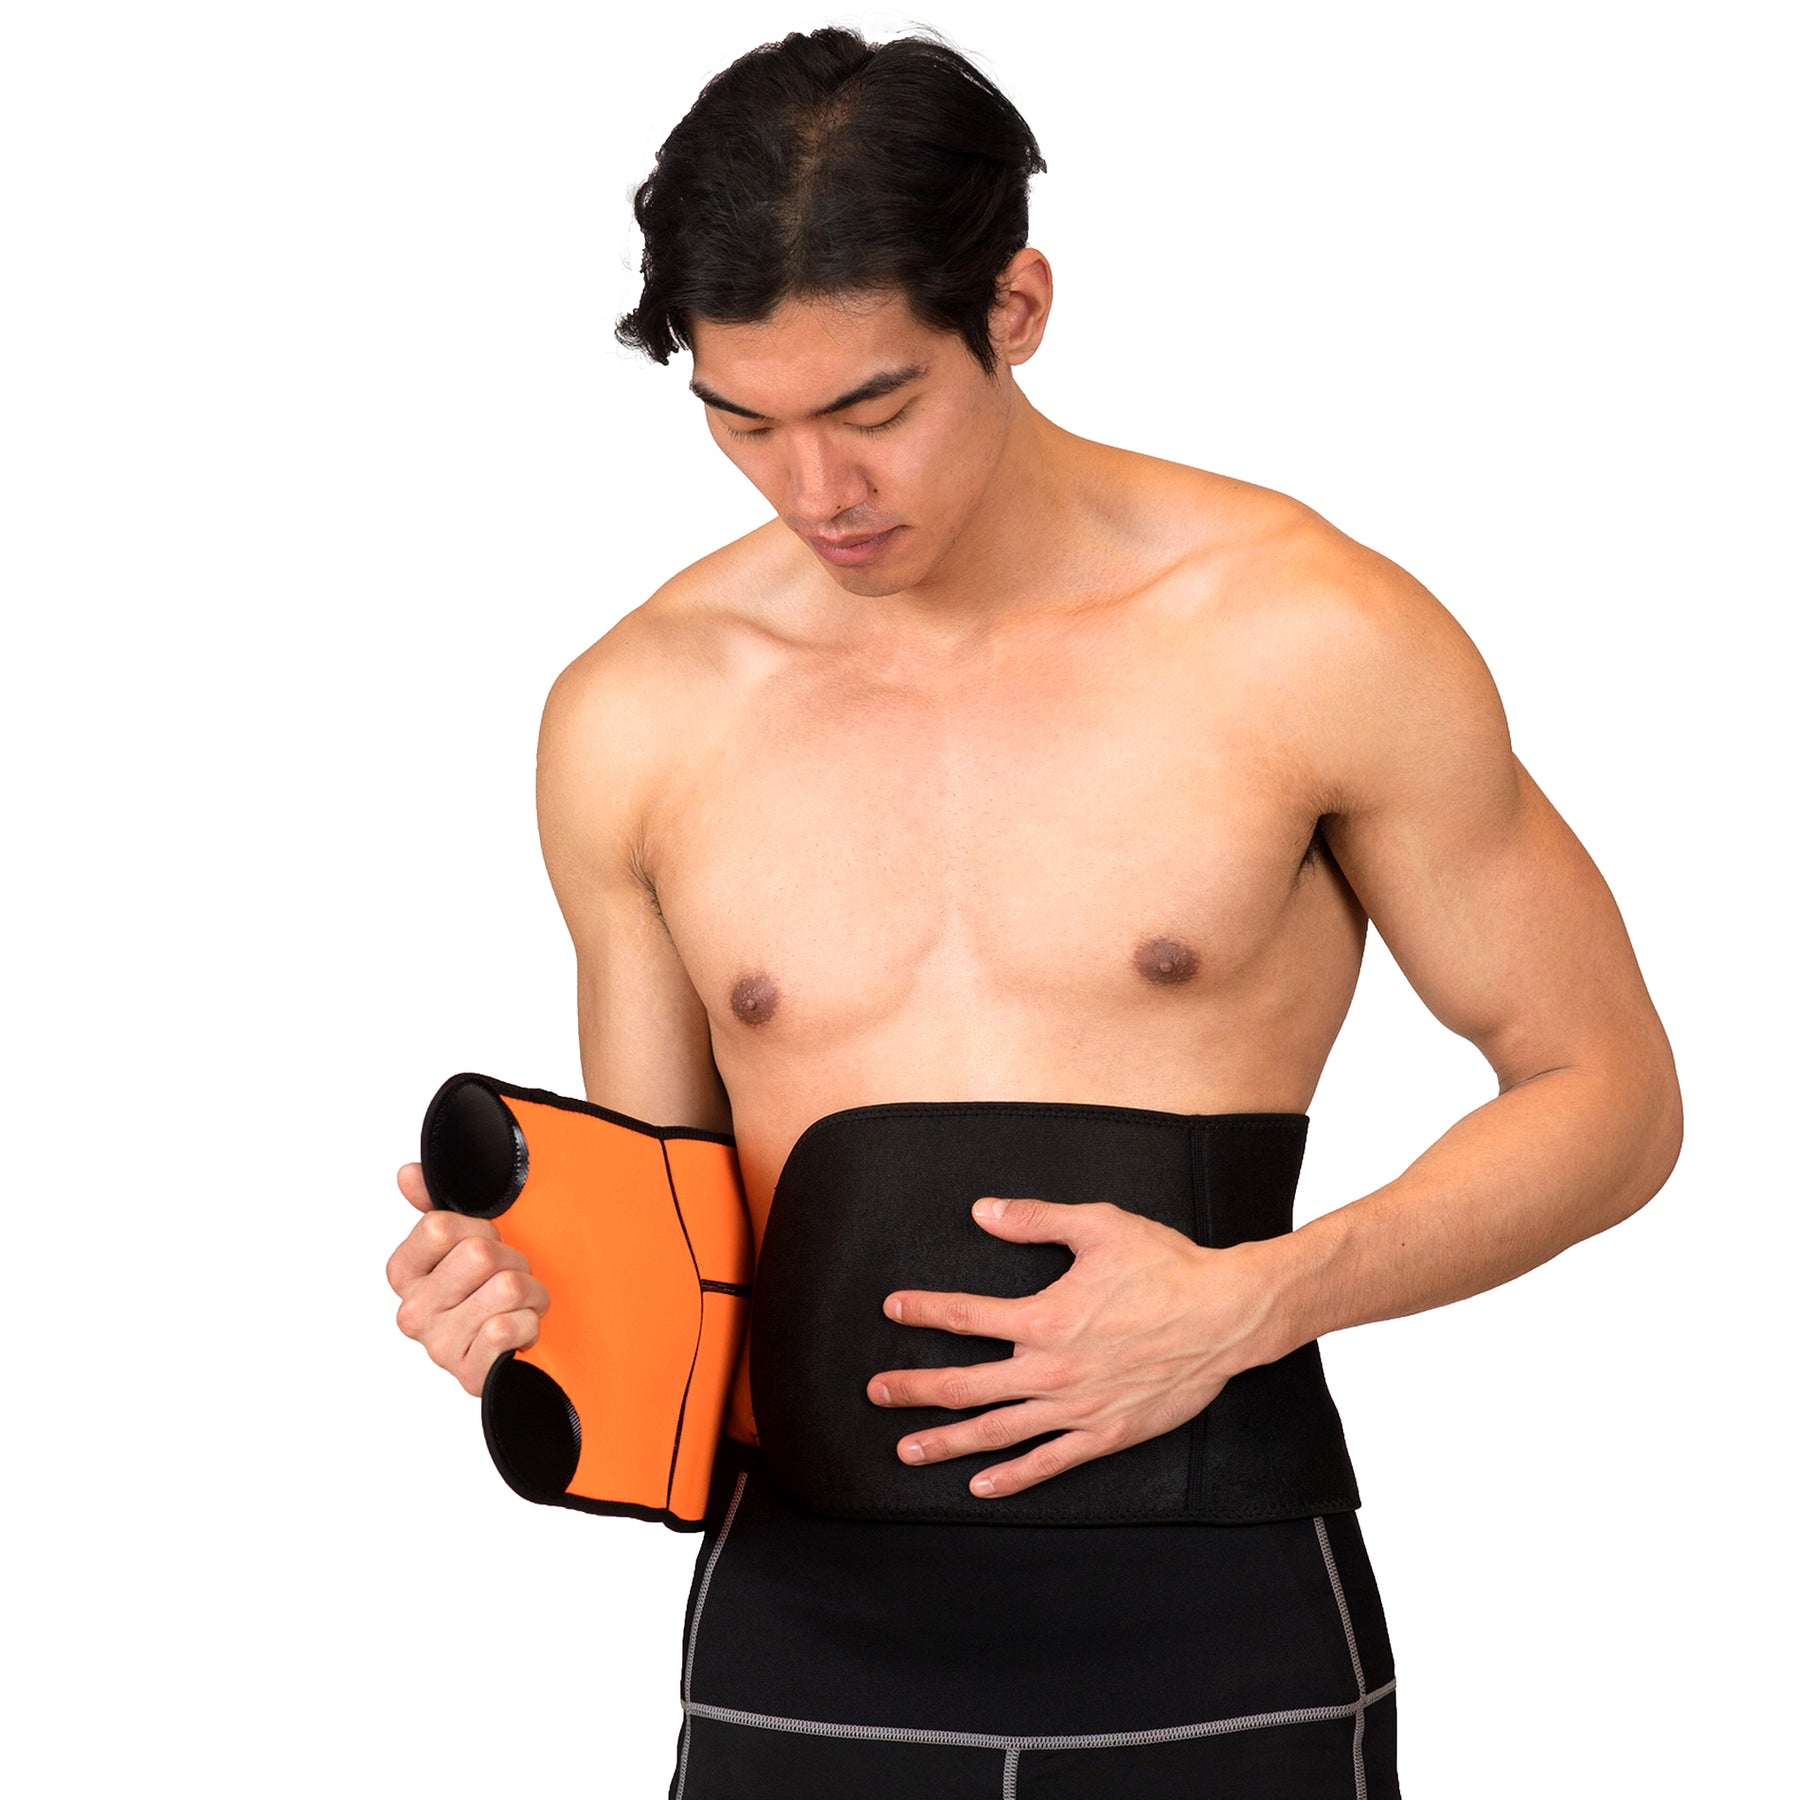 Tactical Bodybuilding Stomach Trimmer Belt For Waist Trimming, Back And  Lumbar Support Equipment Supplies 230608 From Heng04, $10.55